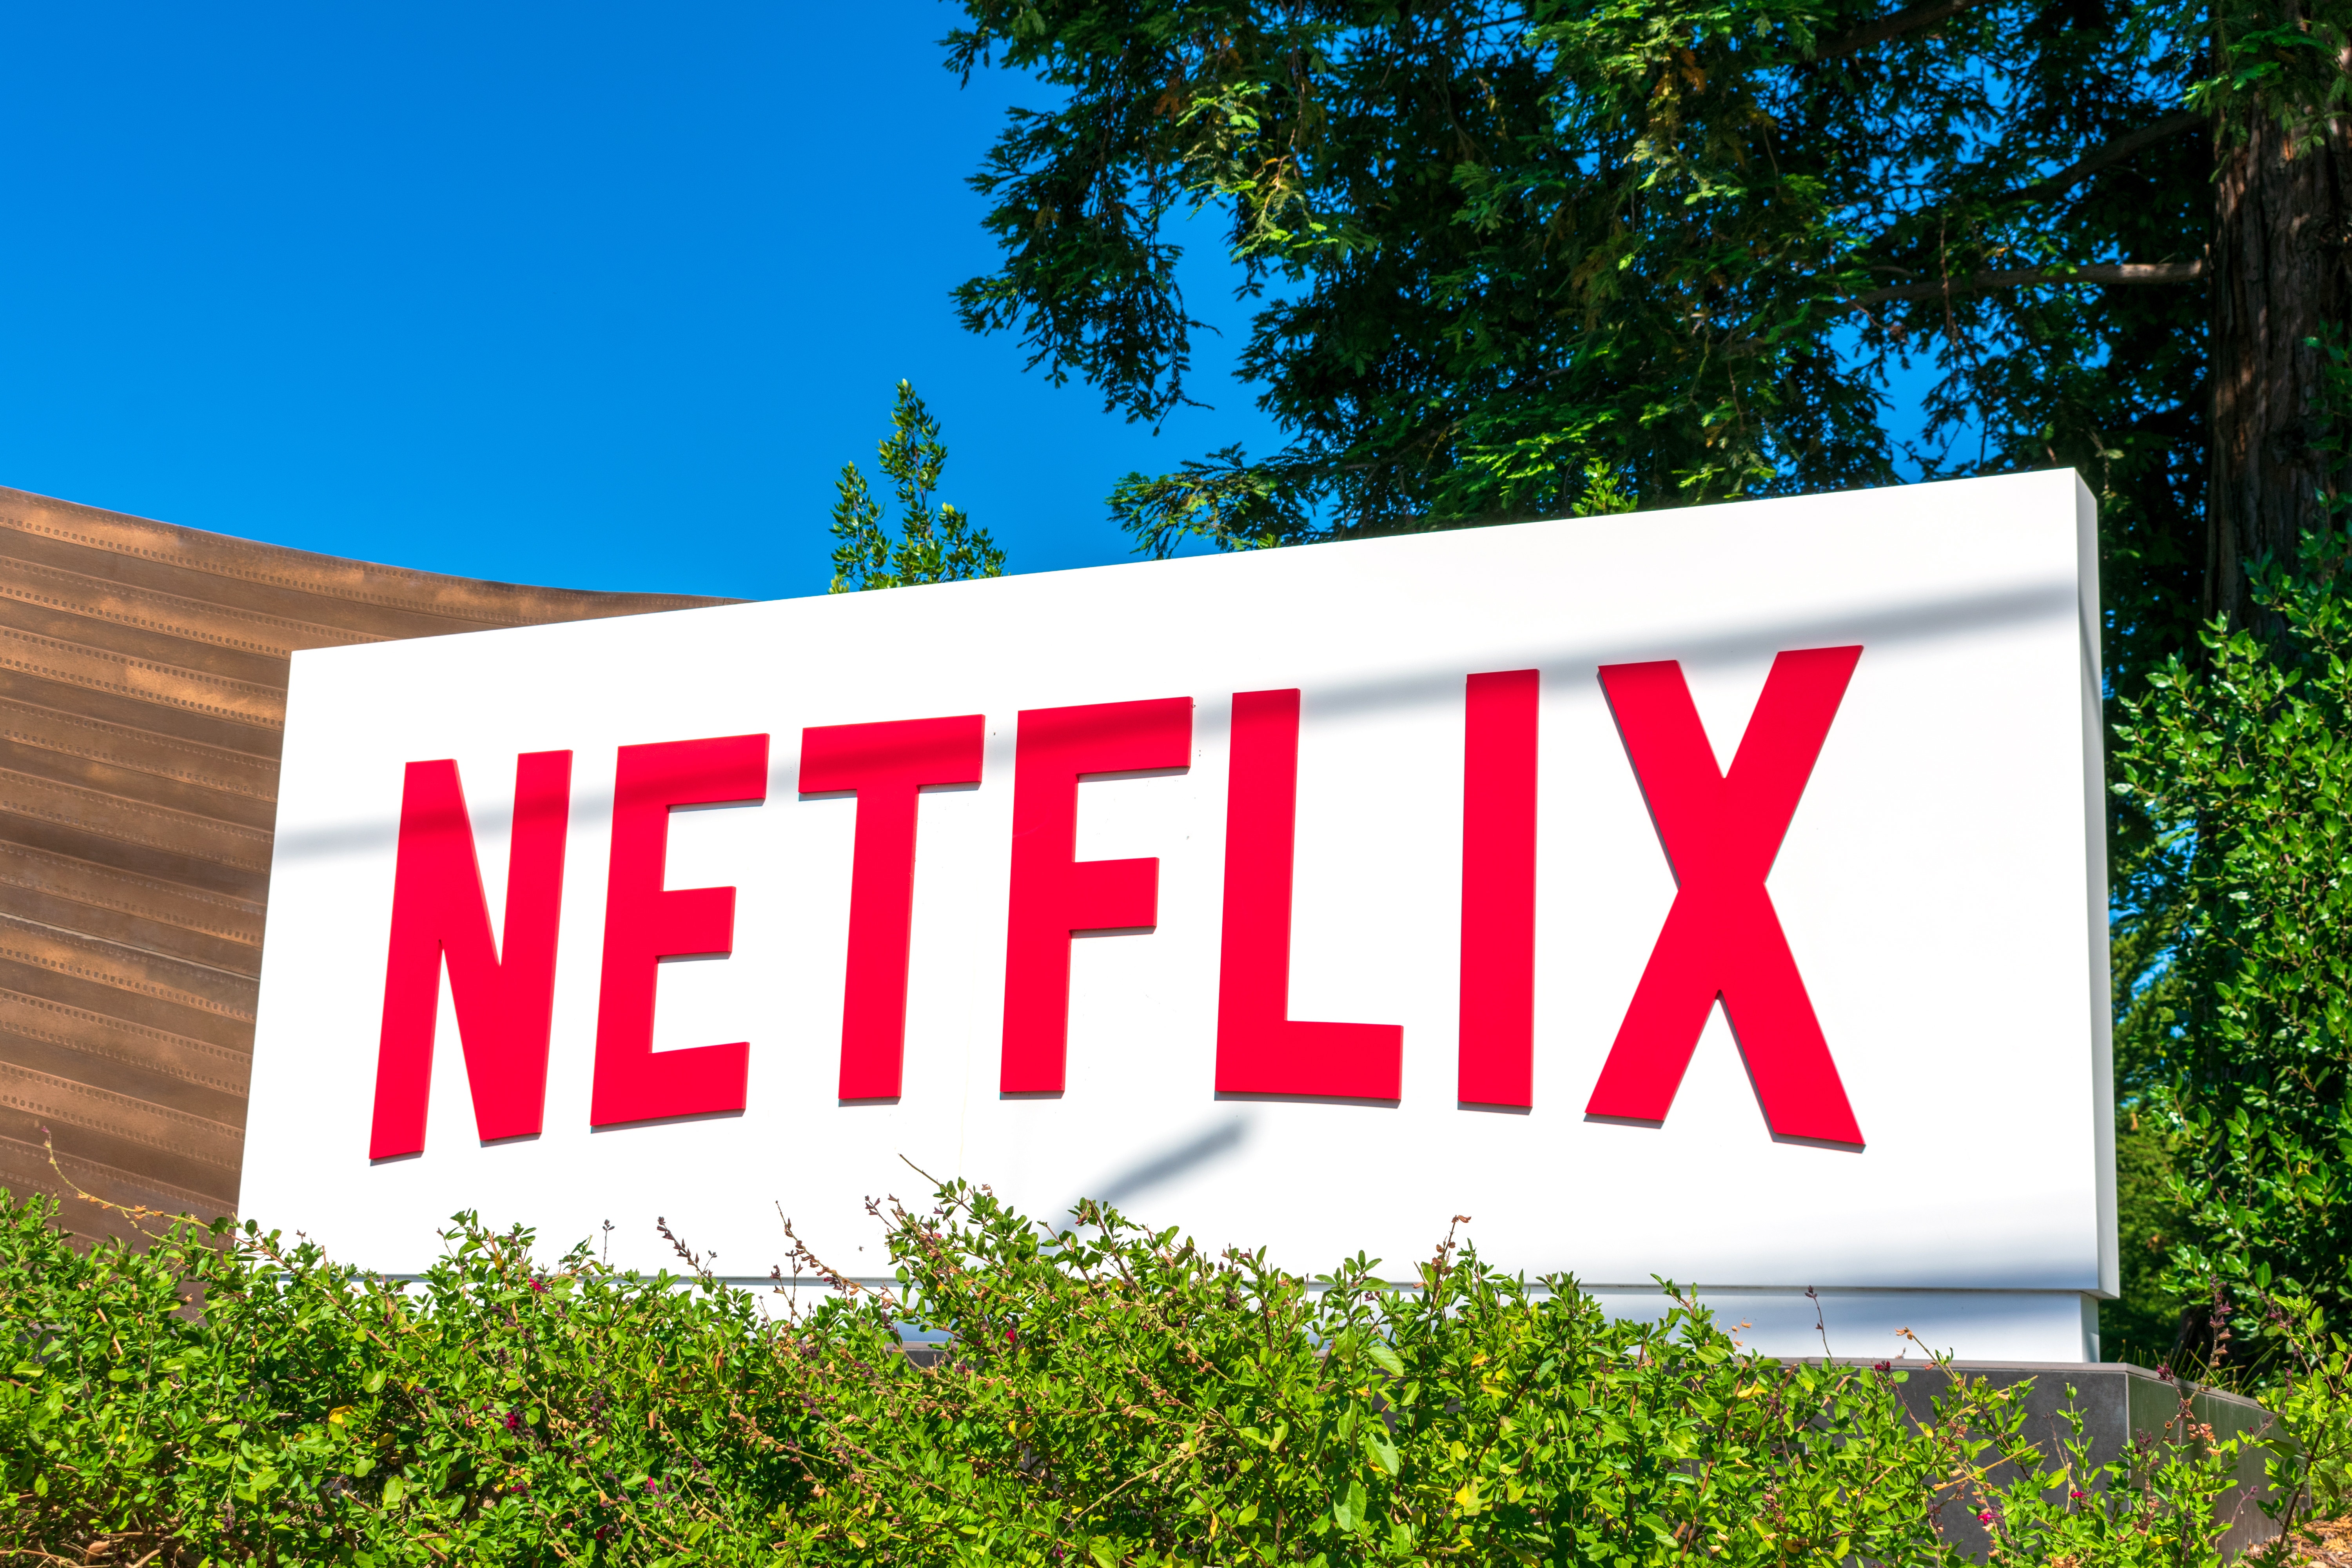 Think Super Bowl Ads Are Expensive? Try Netflix As Ad-Supported Tier Aims To Launch Ahead of Disney+